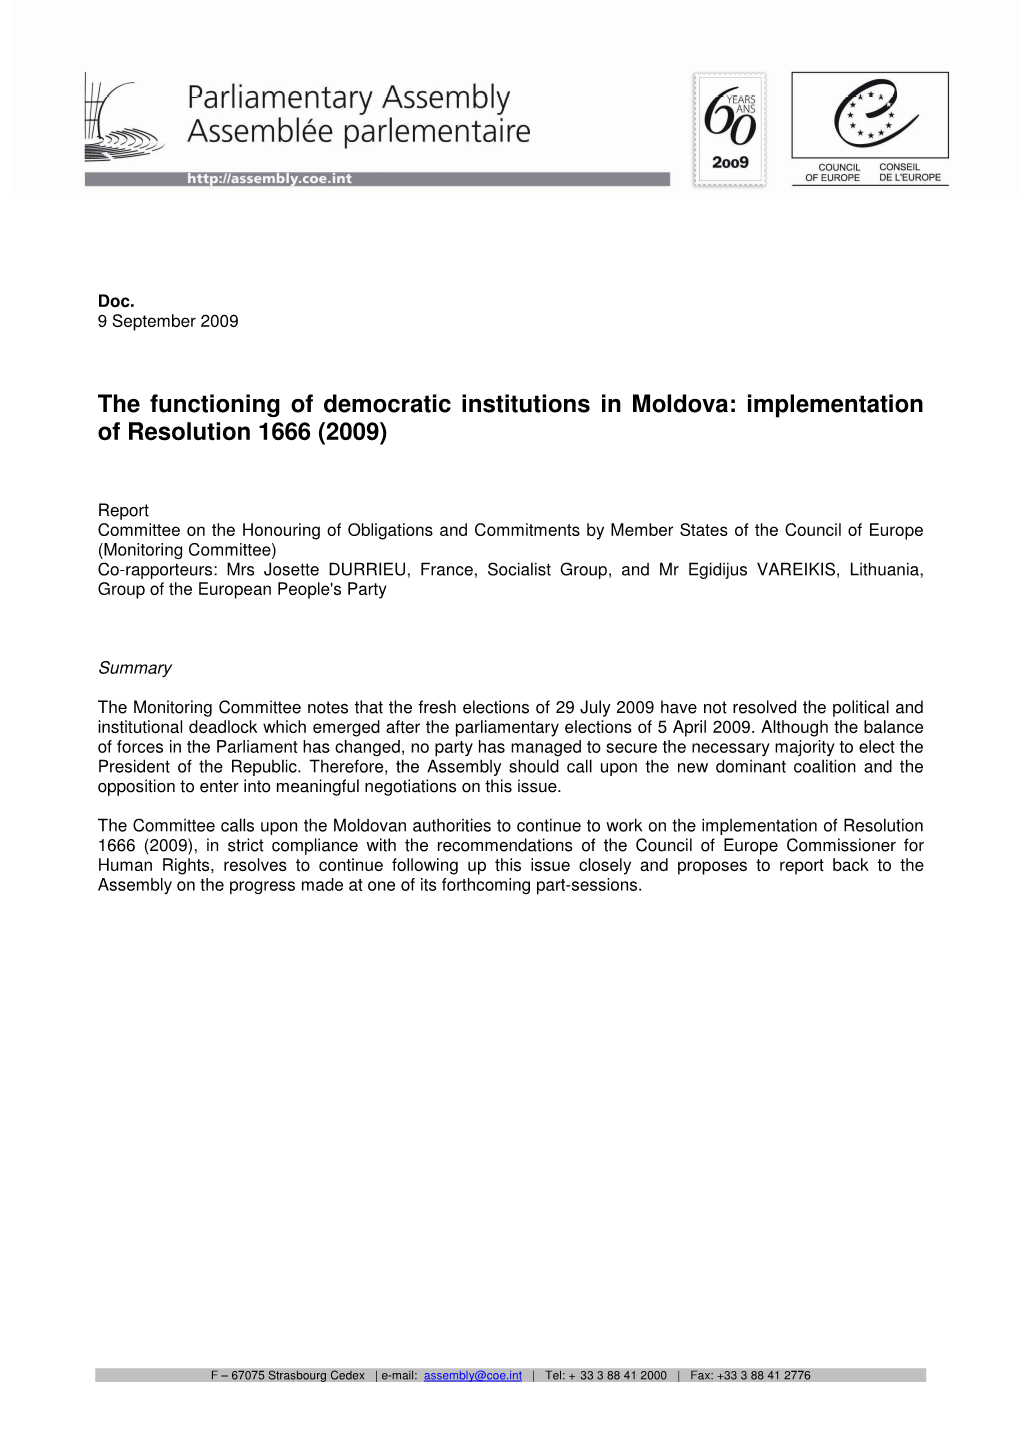 The Functioning of Democratic Institutions in Moldova: Implementation of Resolution 1666 (2009)